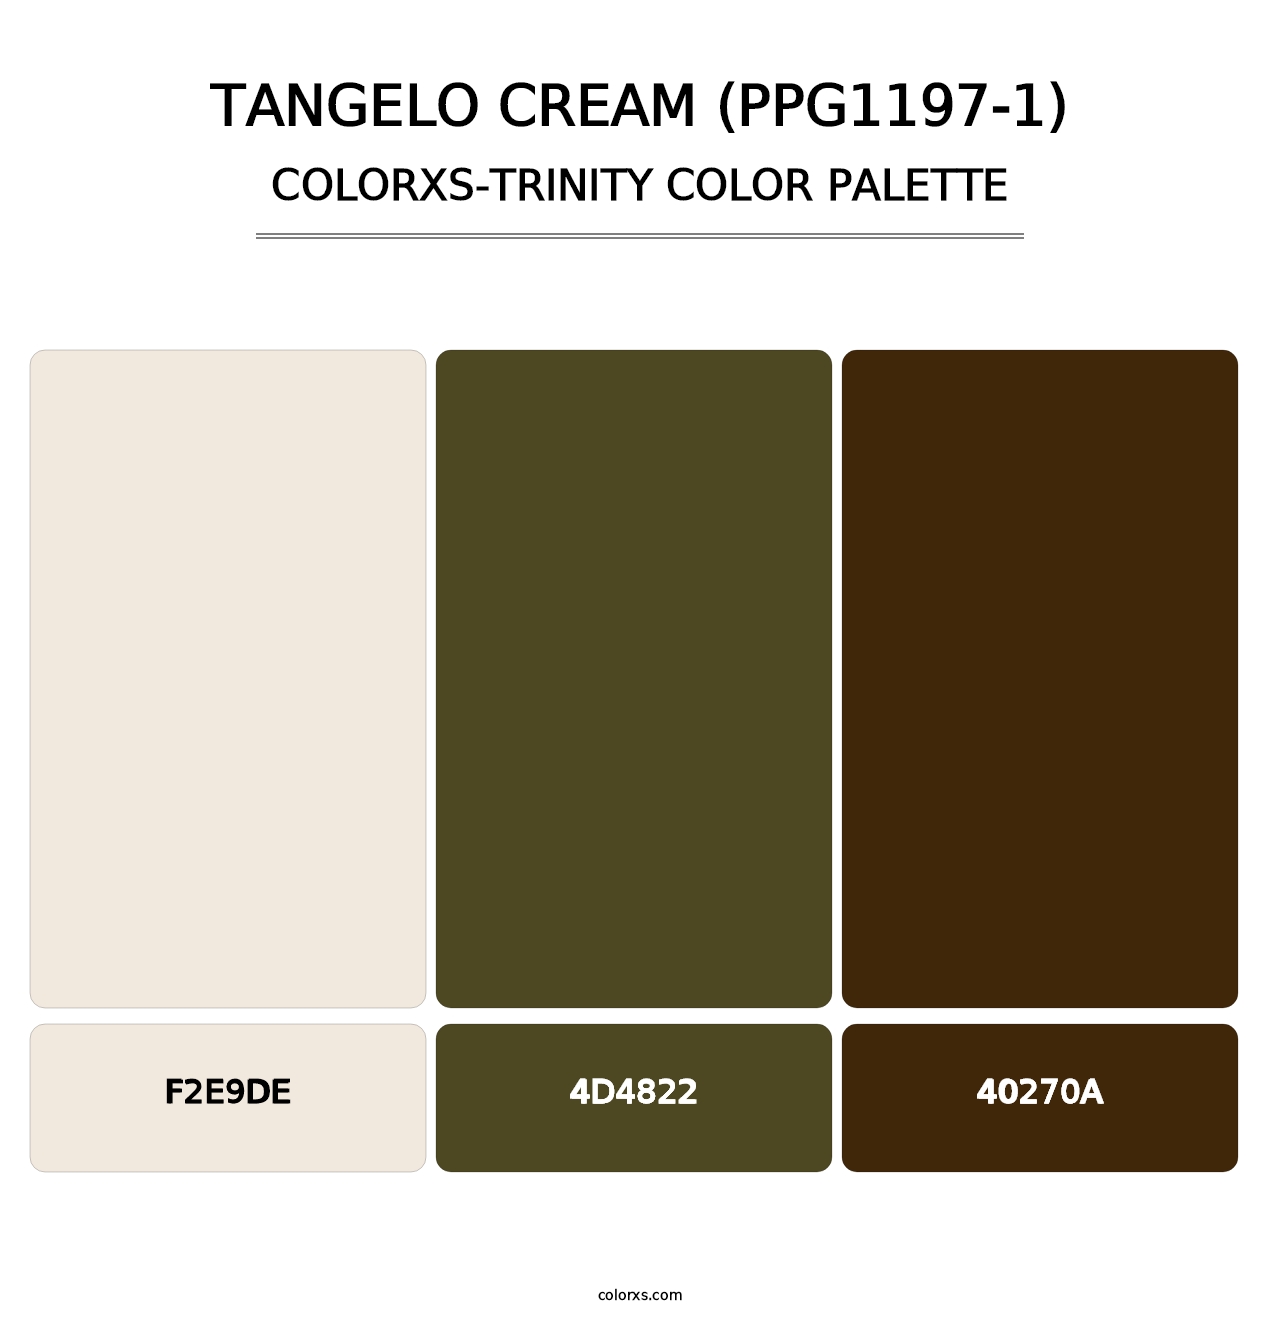 Tangelo Cream (PPG1197-1) - Colorxs Trinity Palette